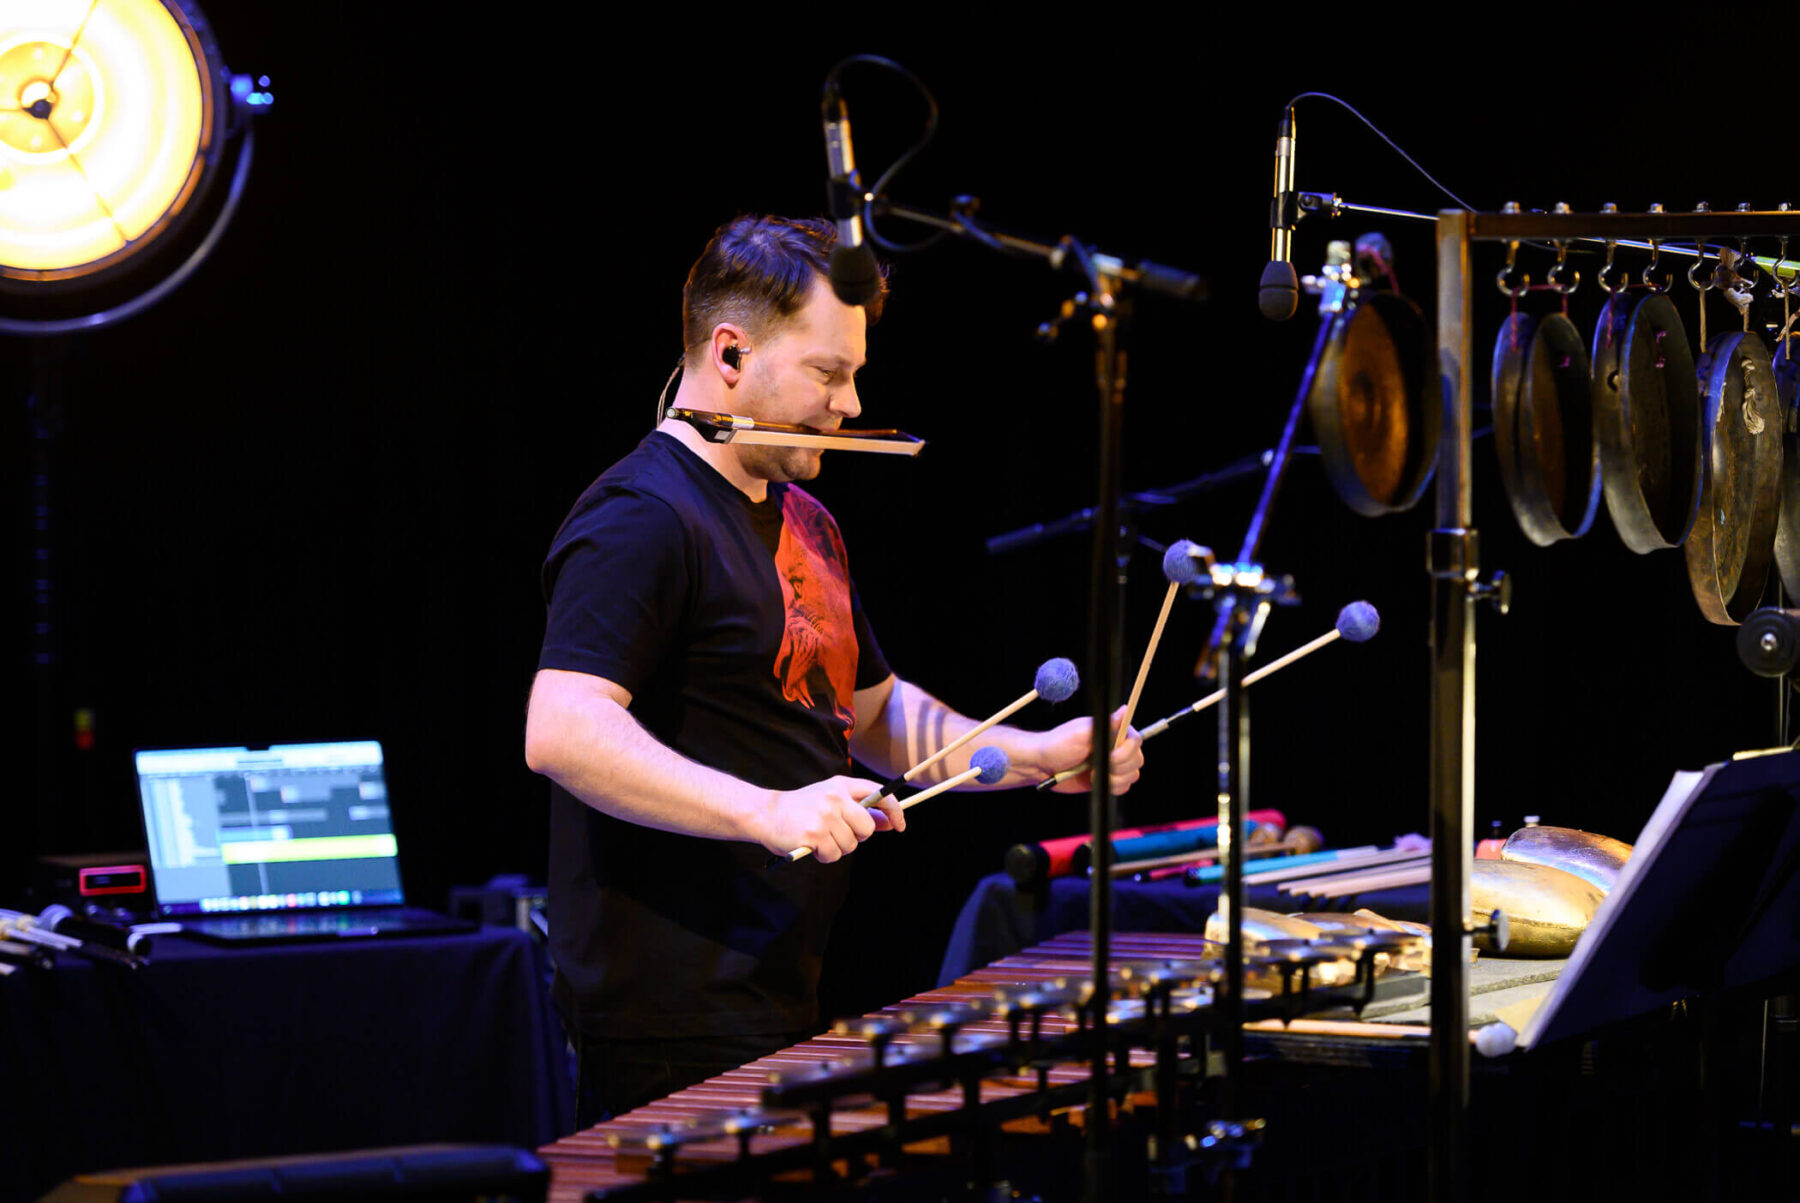 Joby Burgess wearing a black and red shirt with a string bow in his mouth, playing percussion